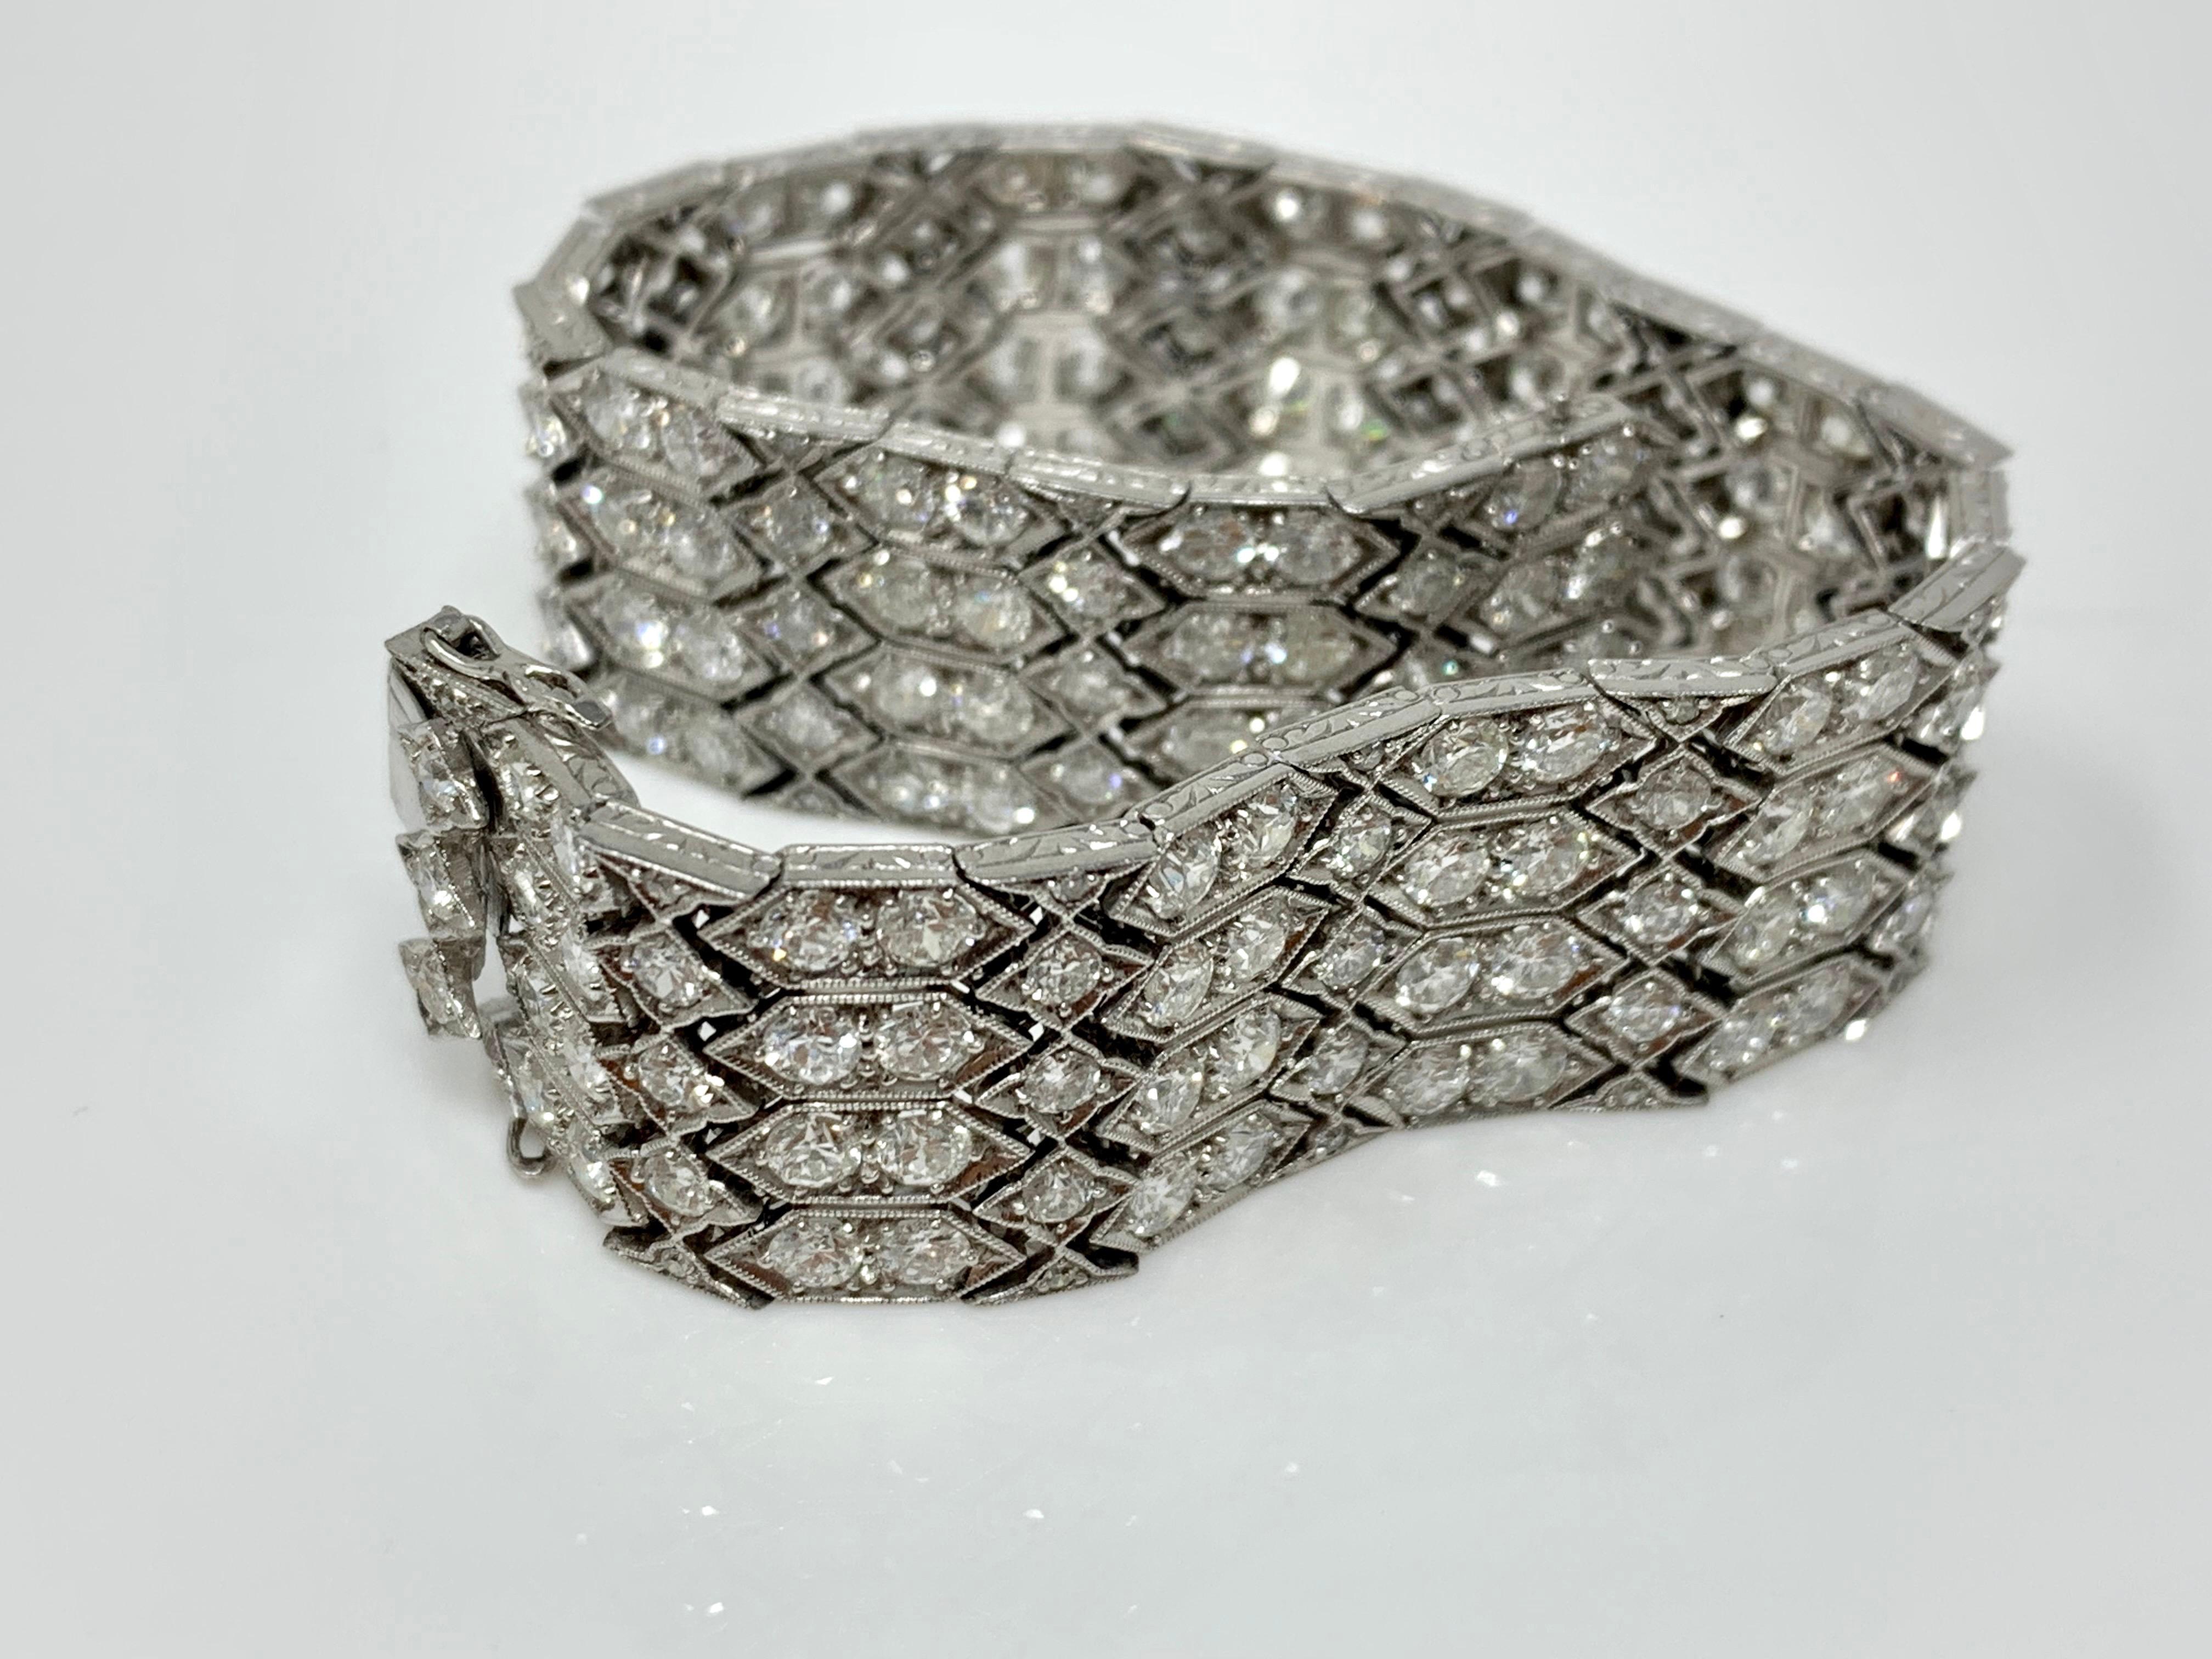 24 Carat 1920 Antique White Diamond Bracelet in Platinum In Excellent Condition For Sale In New York, NY